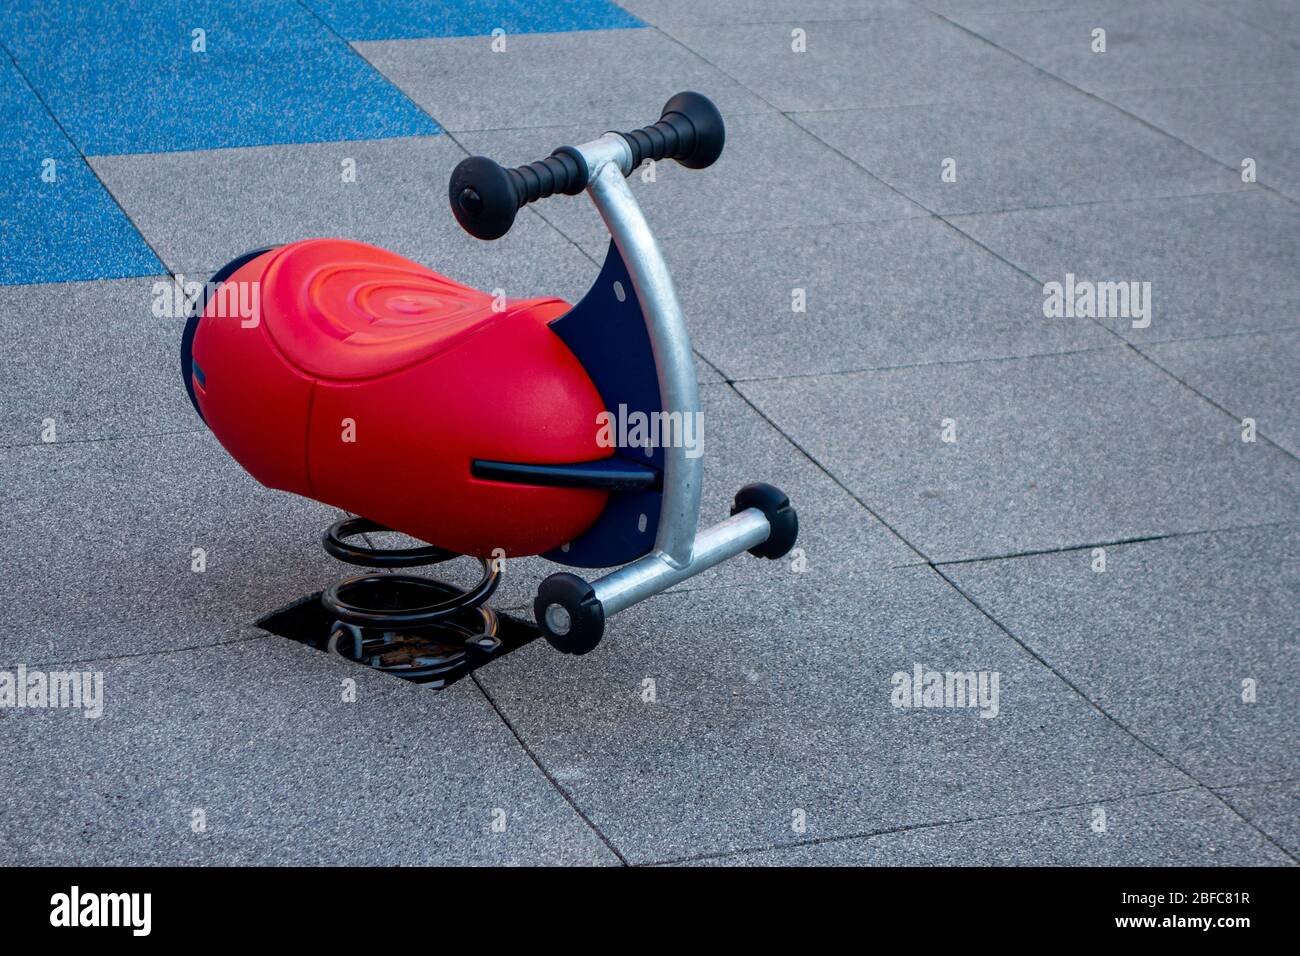 rocker toy rider in a children's public playground with rubber tiled mats Stock Photo